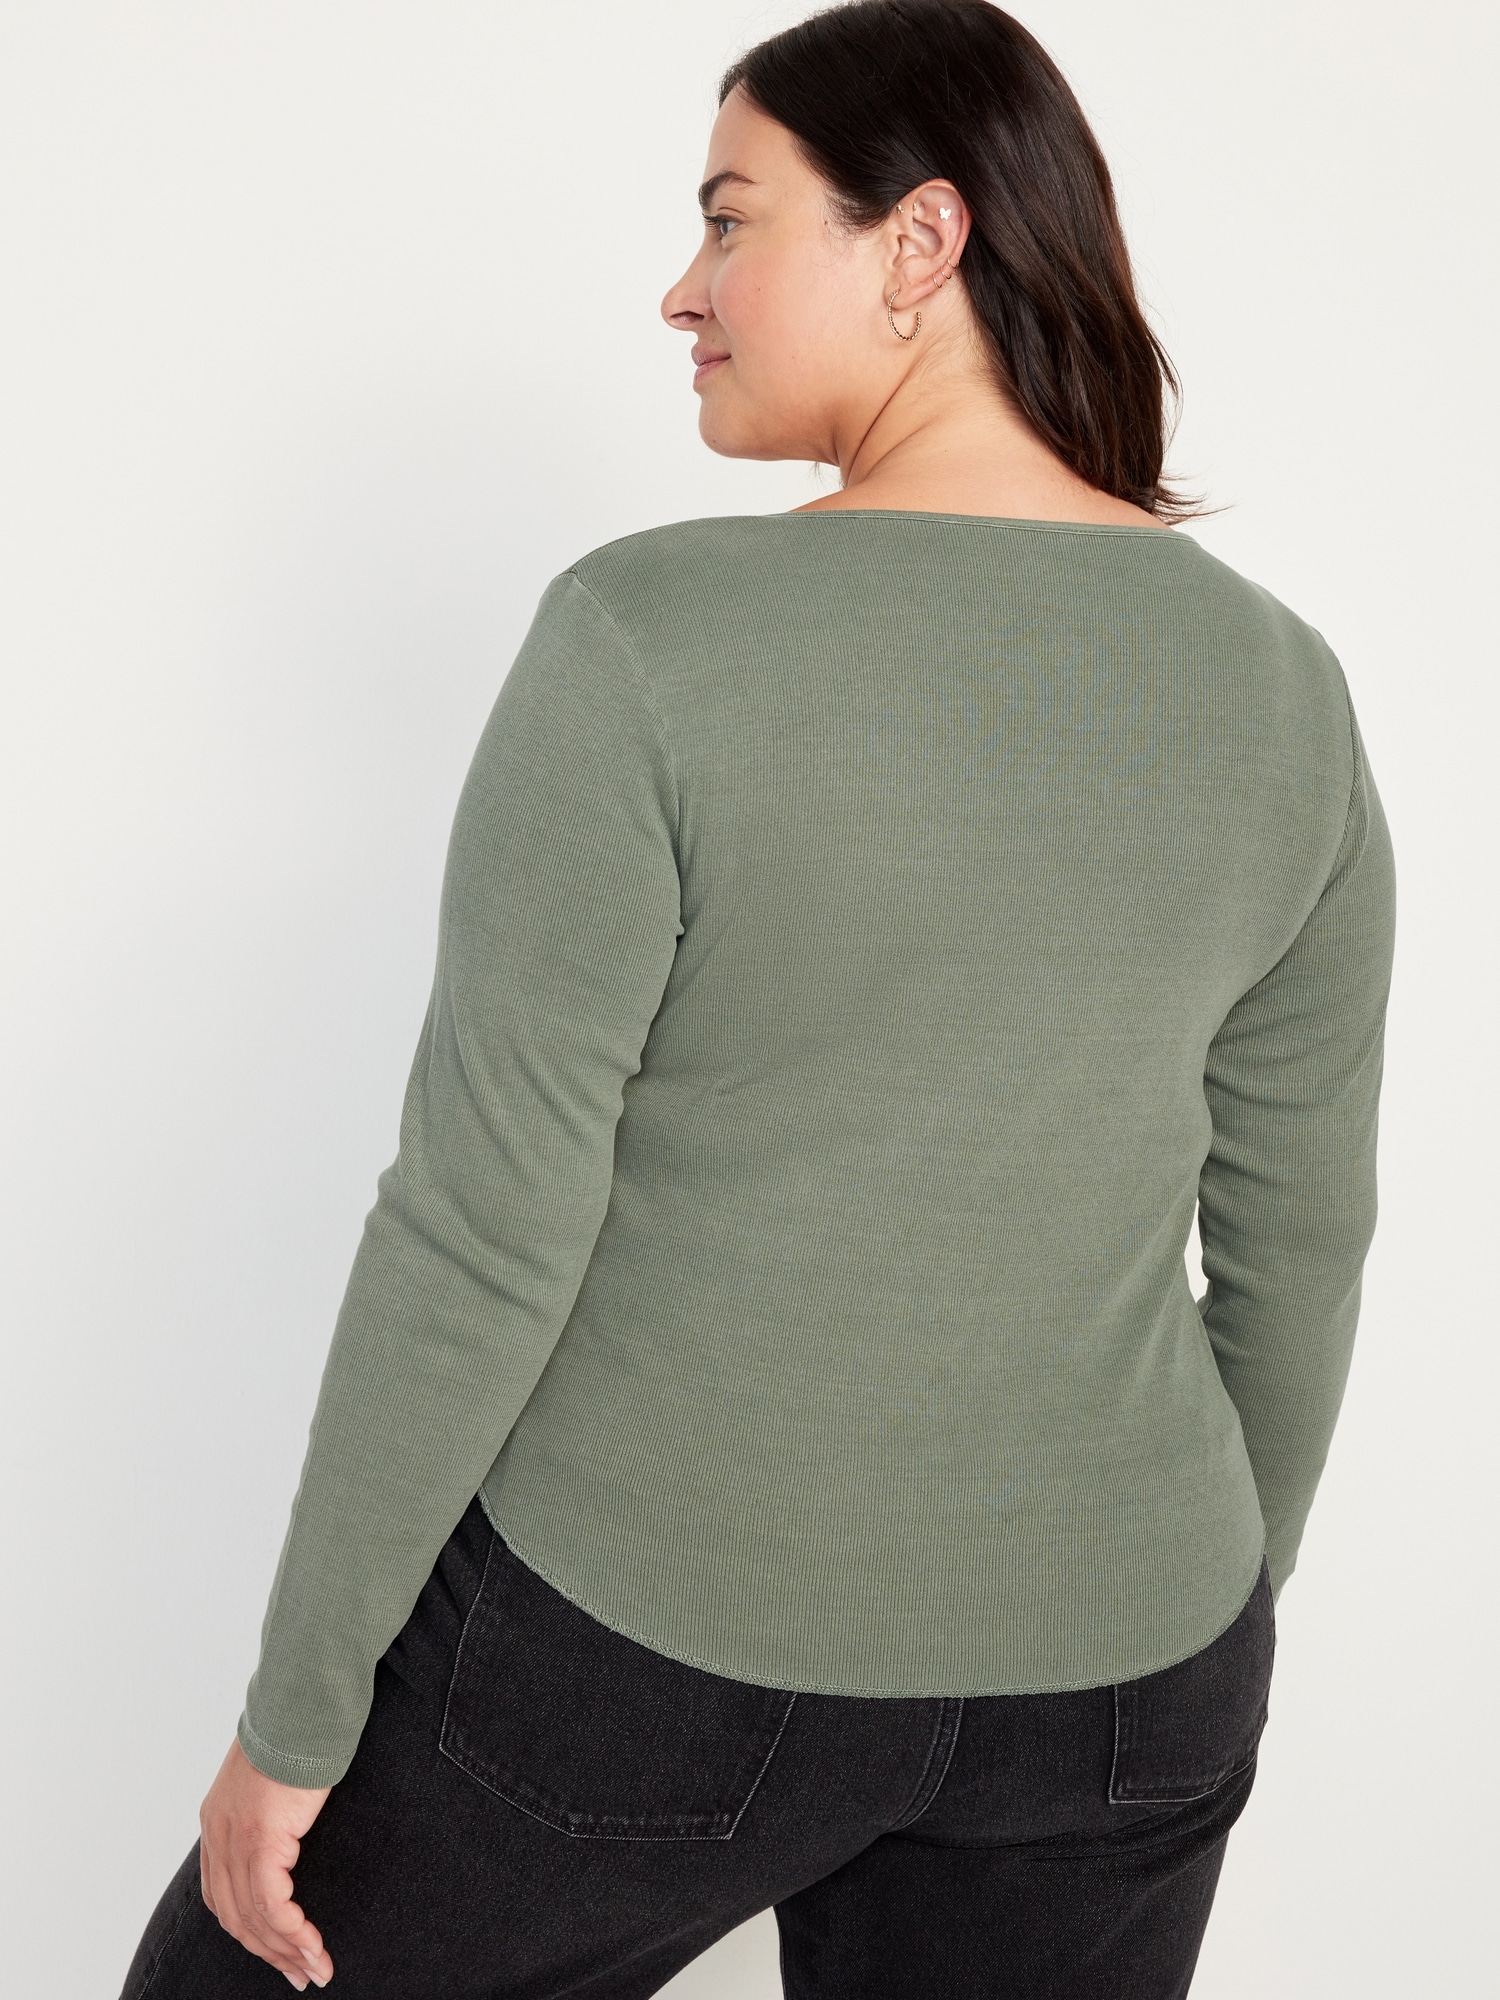 Fitted Long-Sleeve Rib-Knit T-Shirt for Women | Old Navy